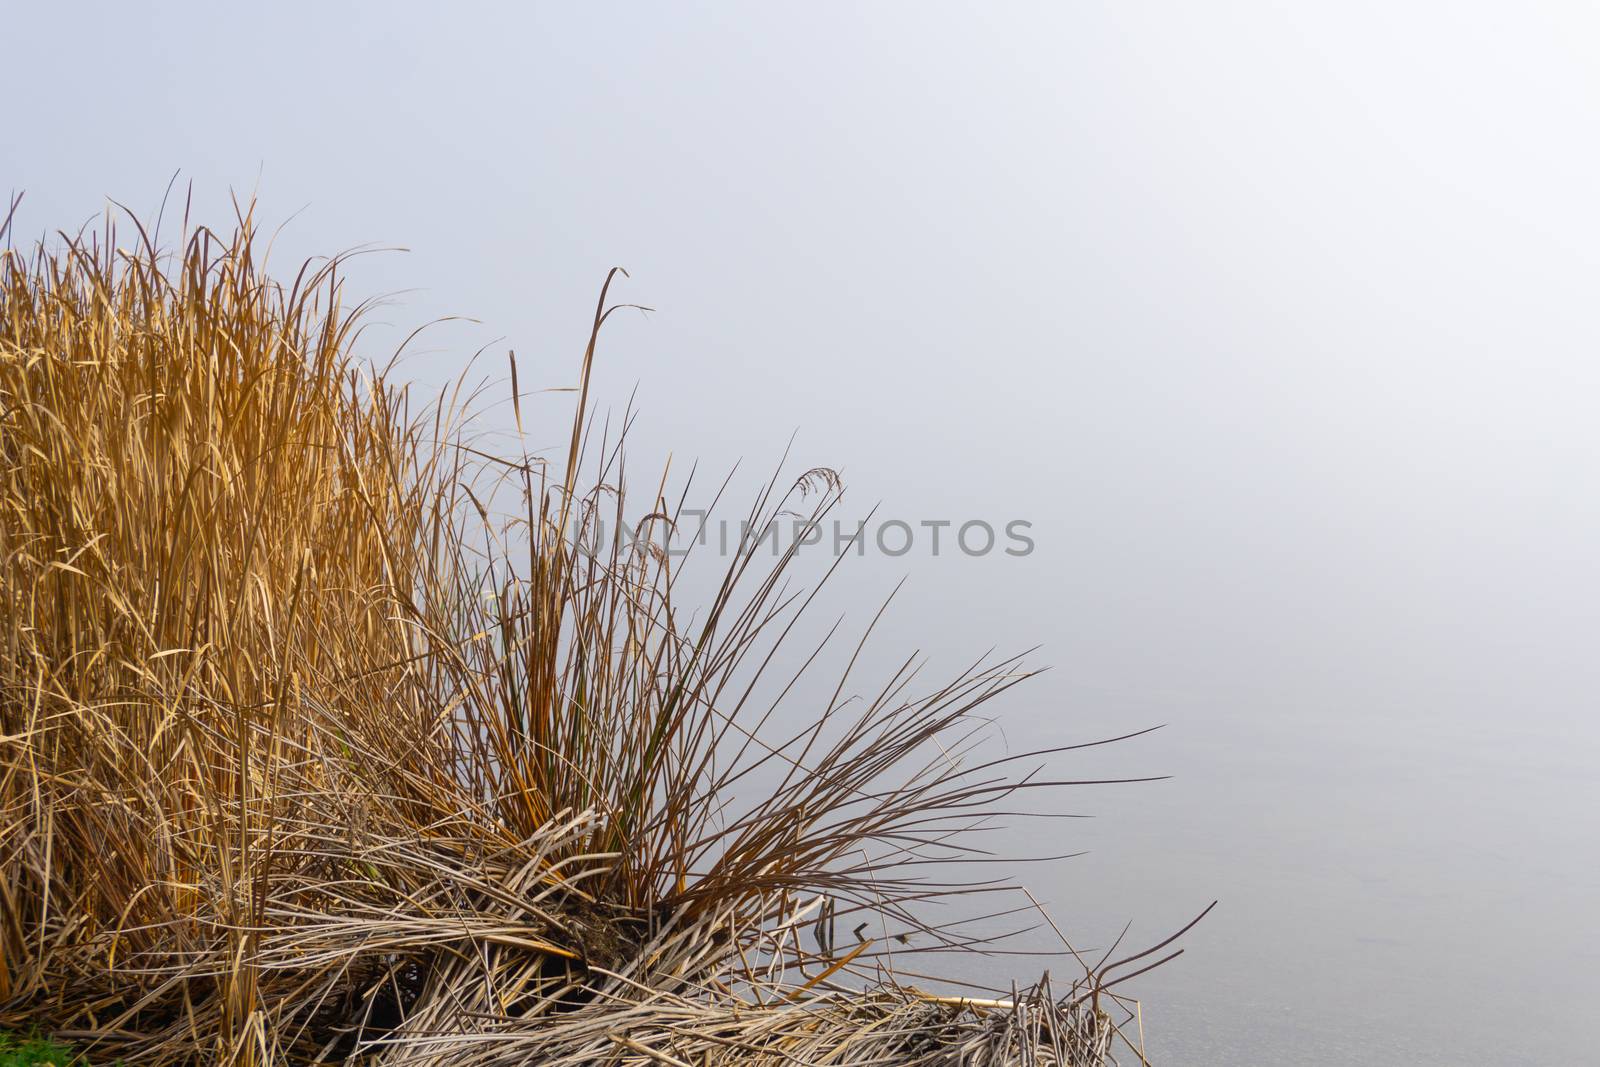 Misty background to dry bulrushes and reeds on edge of lake by brians101